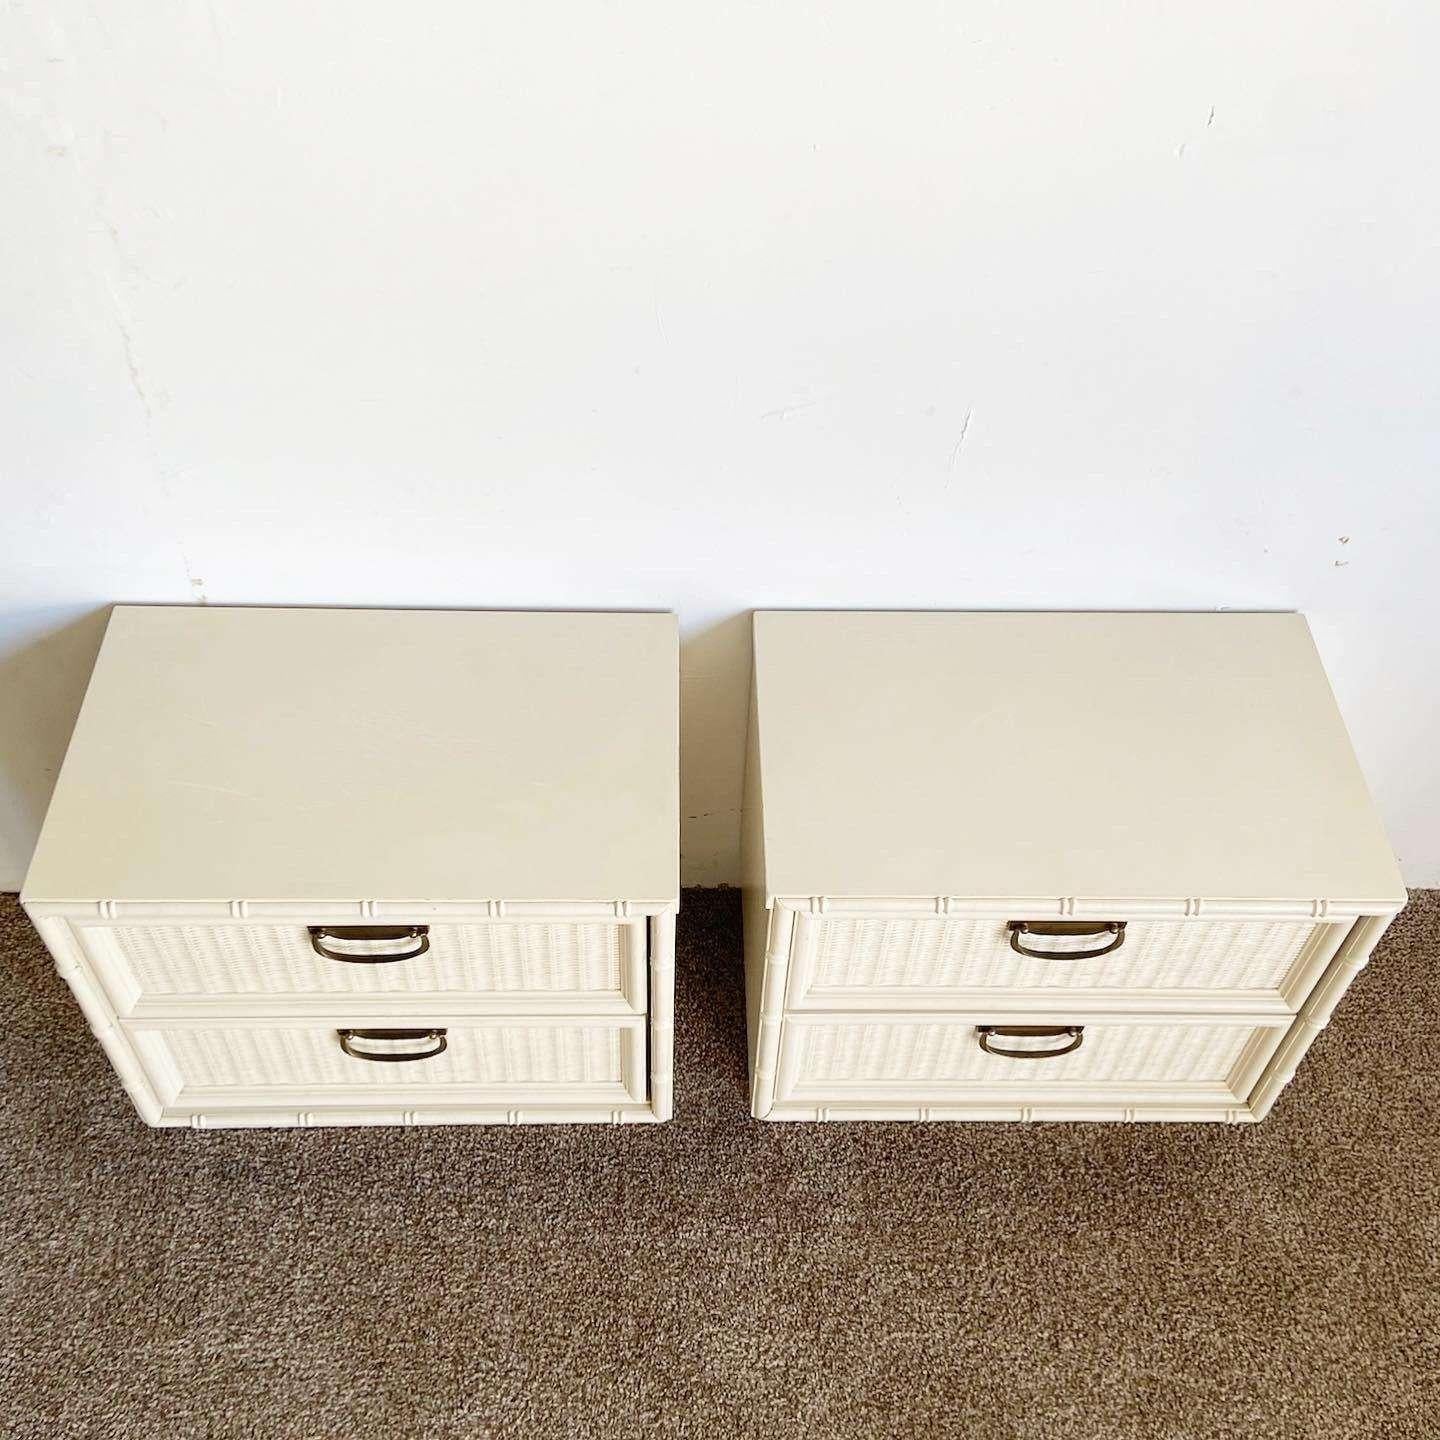 Incredible vintage bohemian pair of faux bamboo nightstands. Each feature faux wicker drawer faces with brass handles and an off white finish.